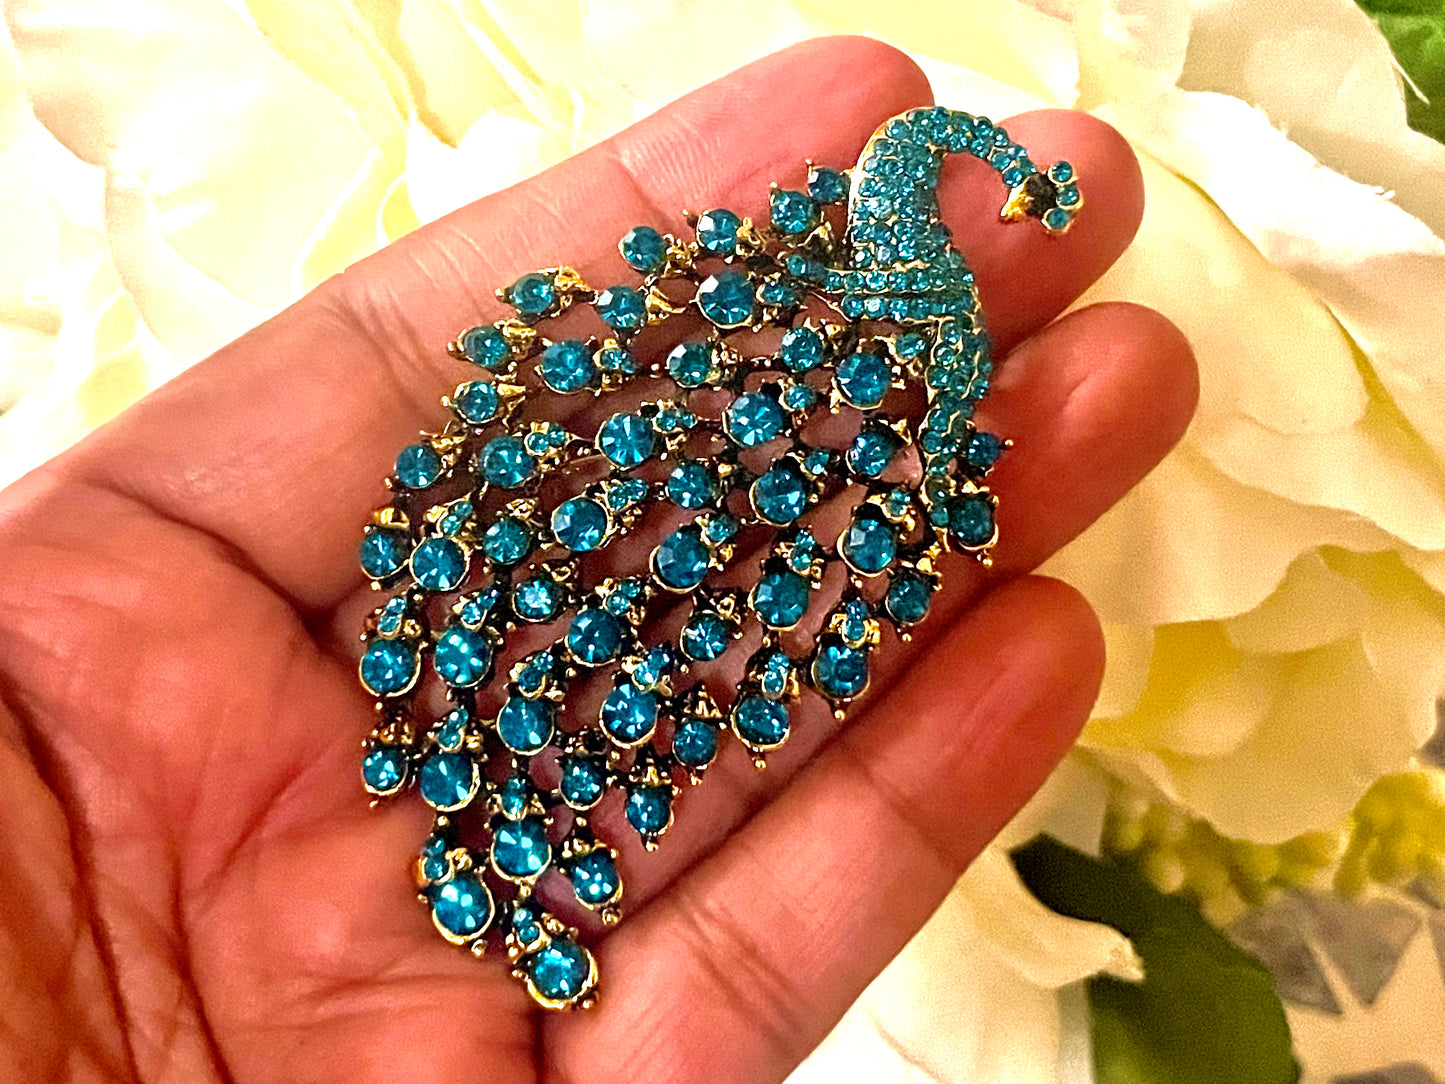 Crystal Peacock Brooch Pin For Women scarf charm Pendant Party Jewelry Gift